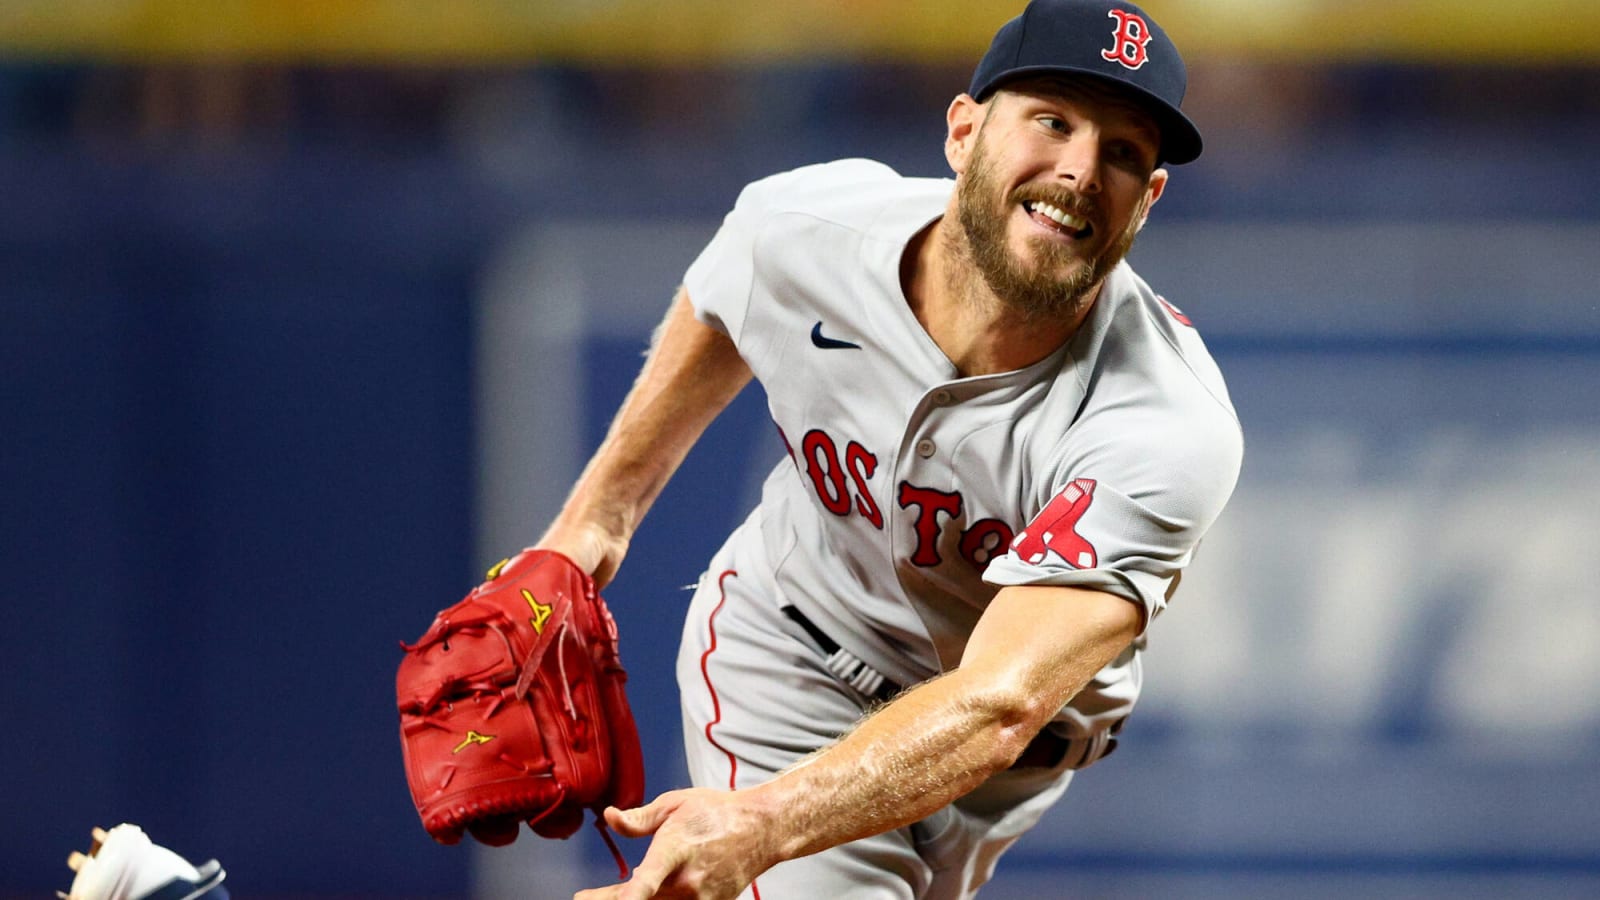 Chris Sale fans 5 over 3 scoreless innings as Red Sox come up short in 4-3 loss to Twins